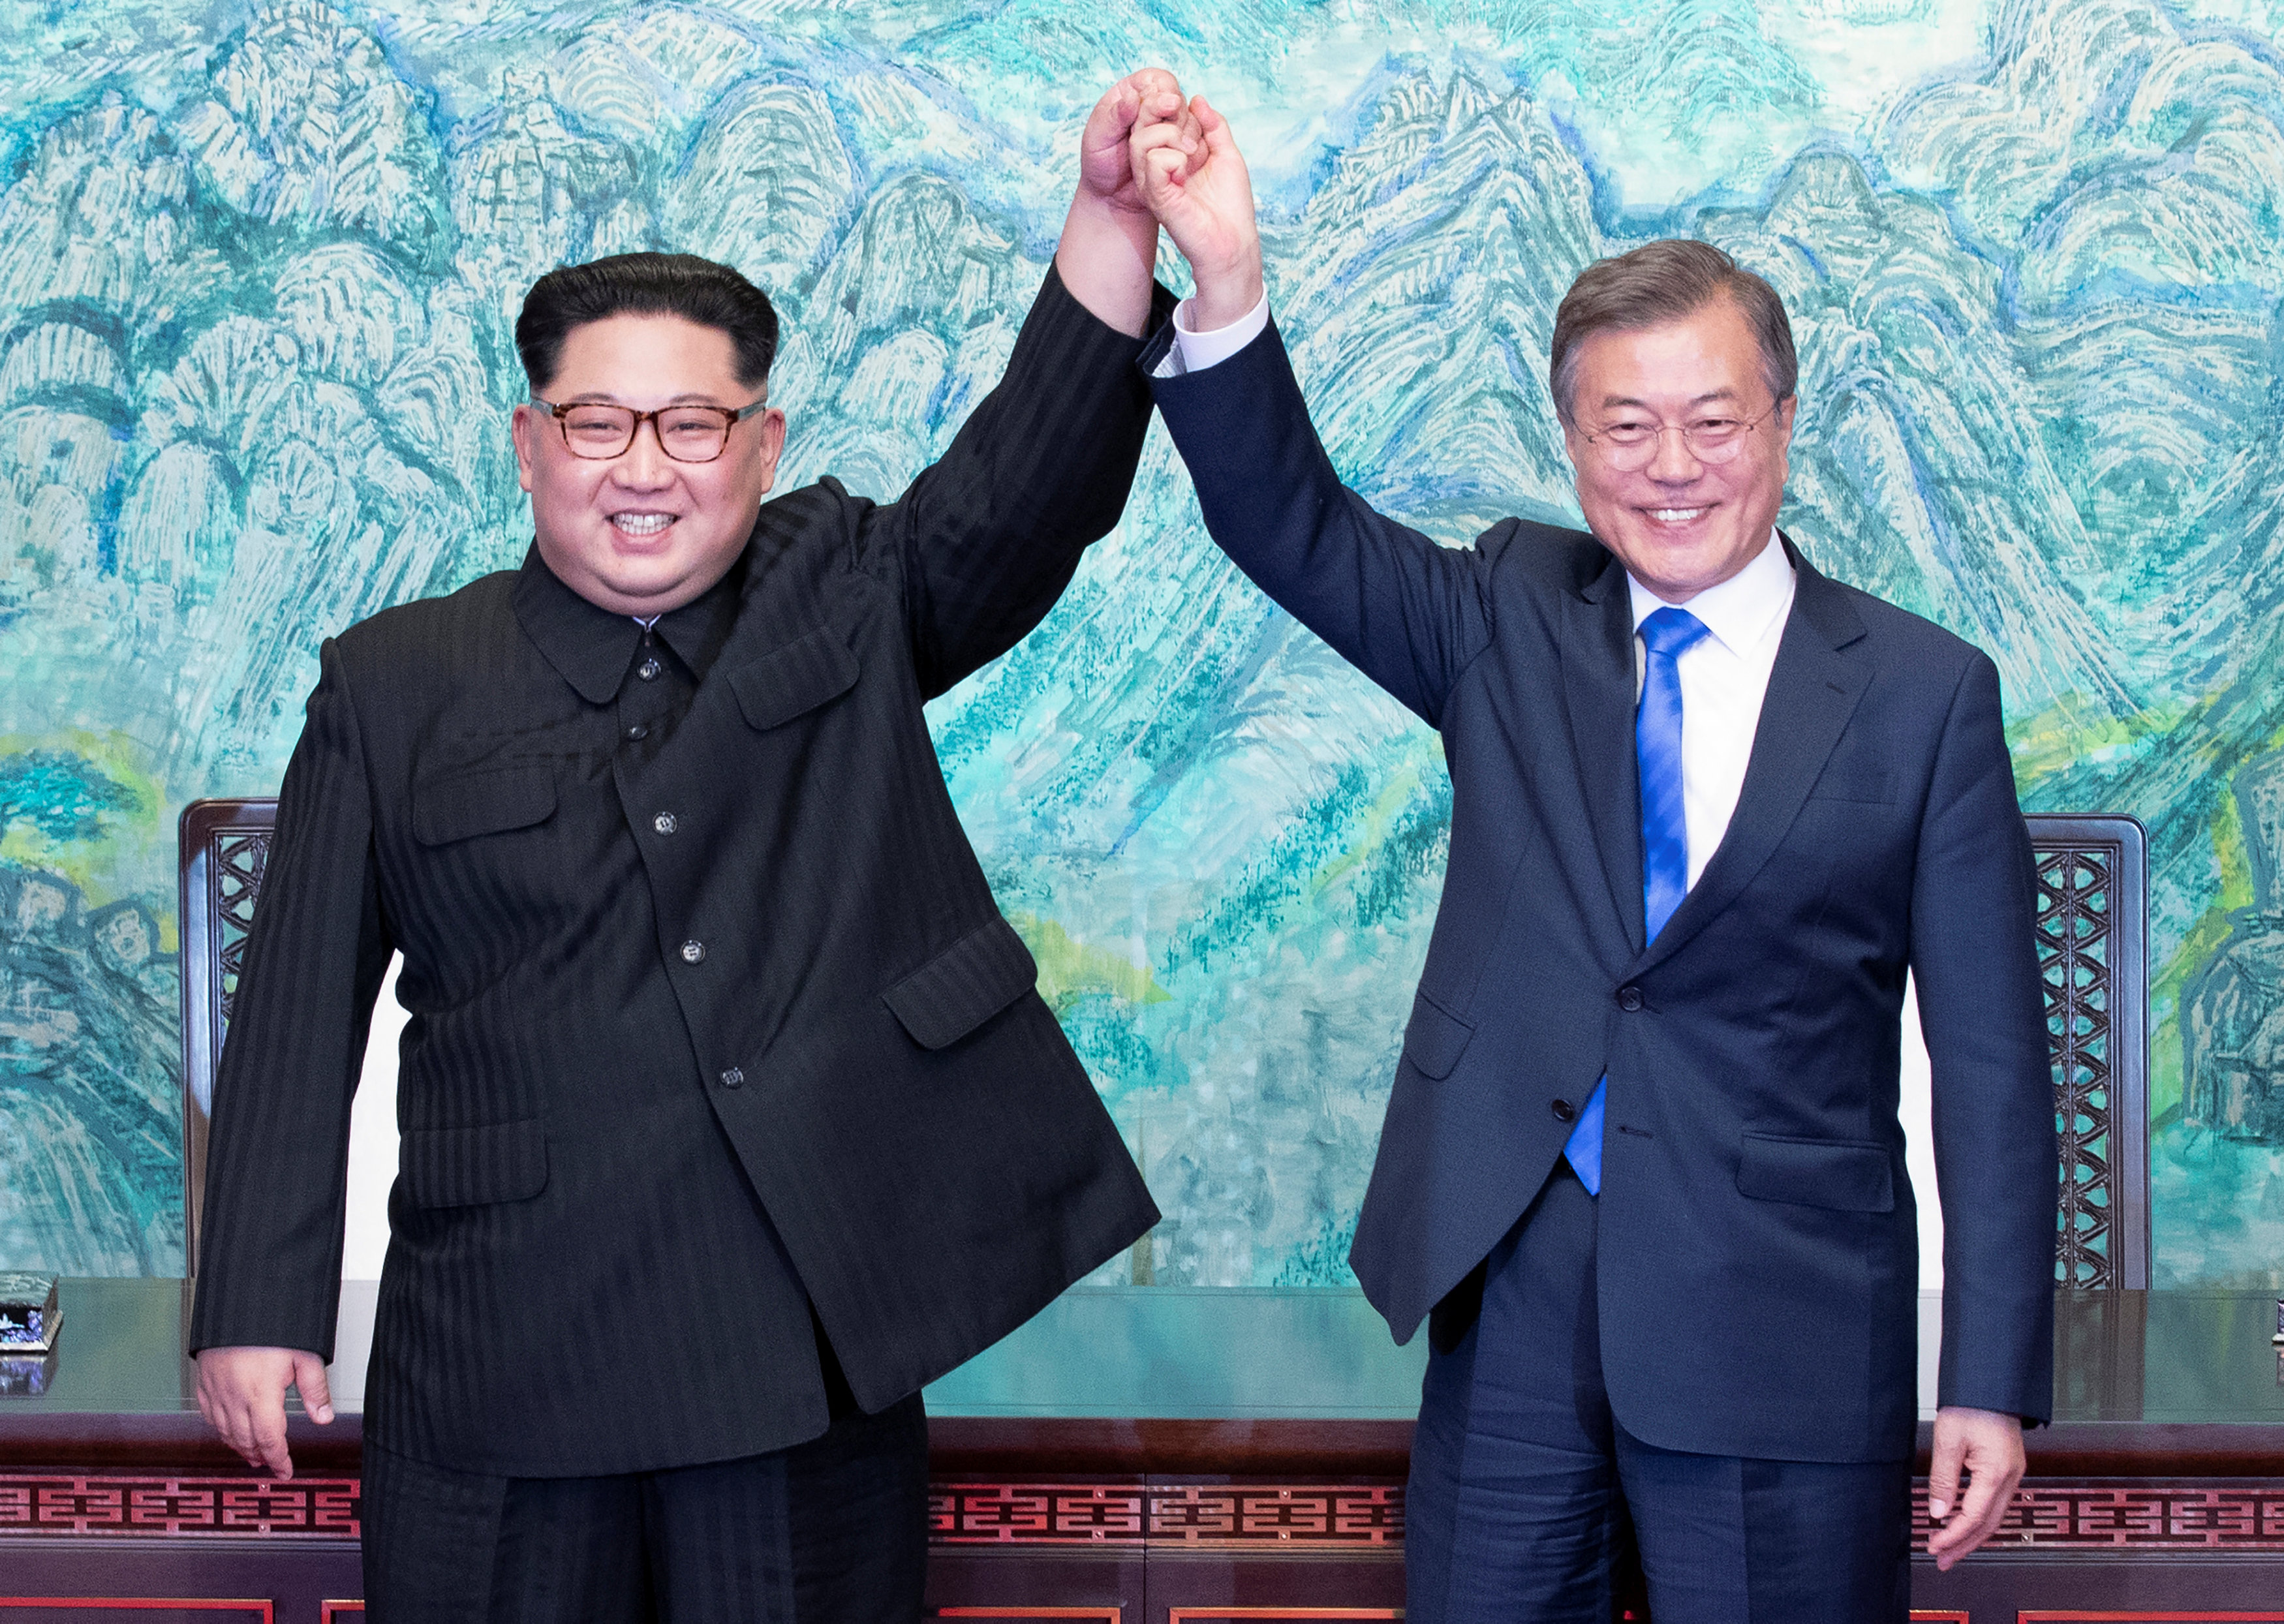 South Korean President Moon Jae-in and North Korean leader Kim Jong-un raise their hands at the truce village of Panmunjom inside the demilitarised zone separating the two Koreas, April 27, 2018. u00e2u20acu201d Reuters pic